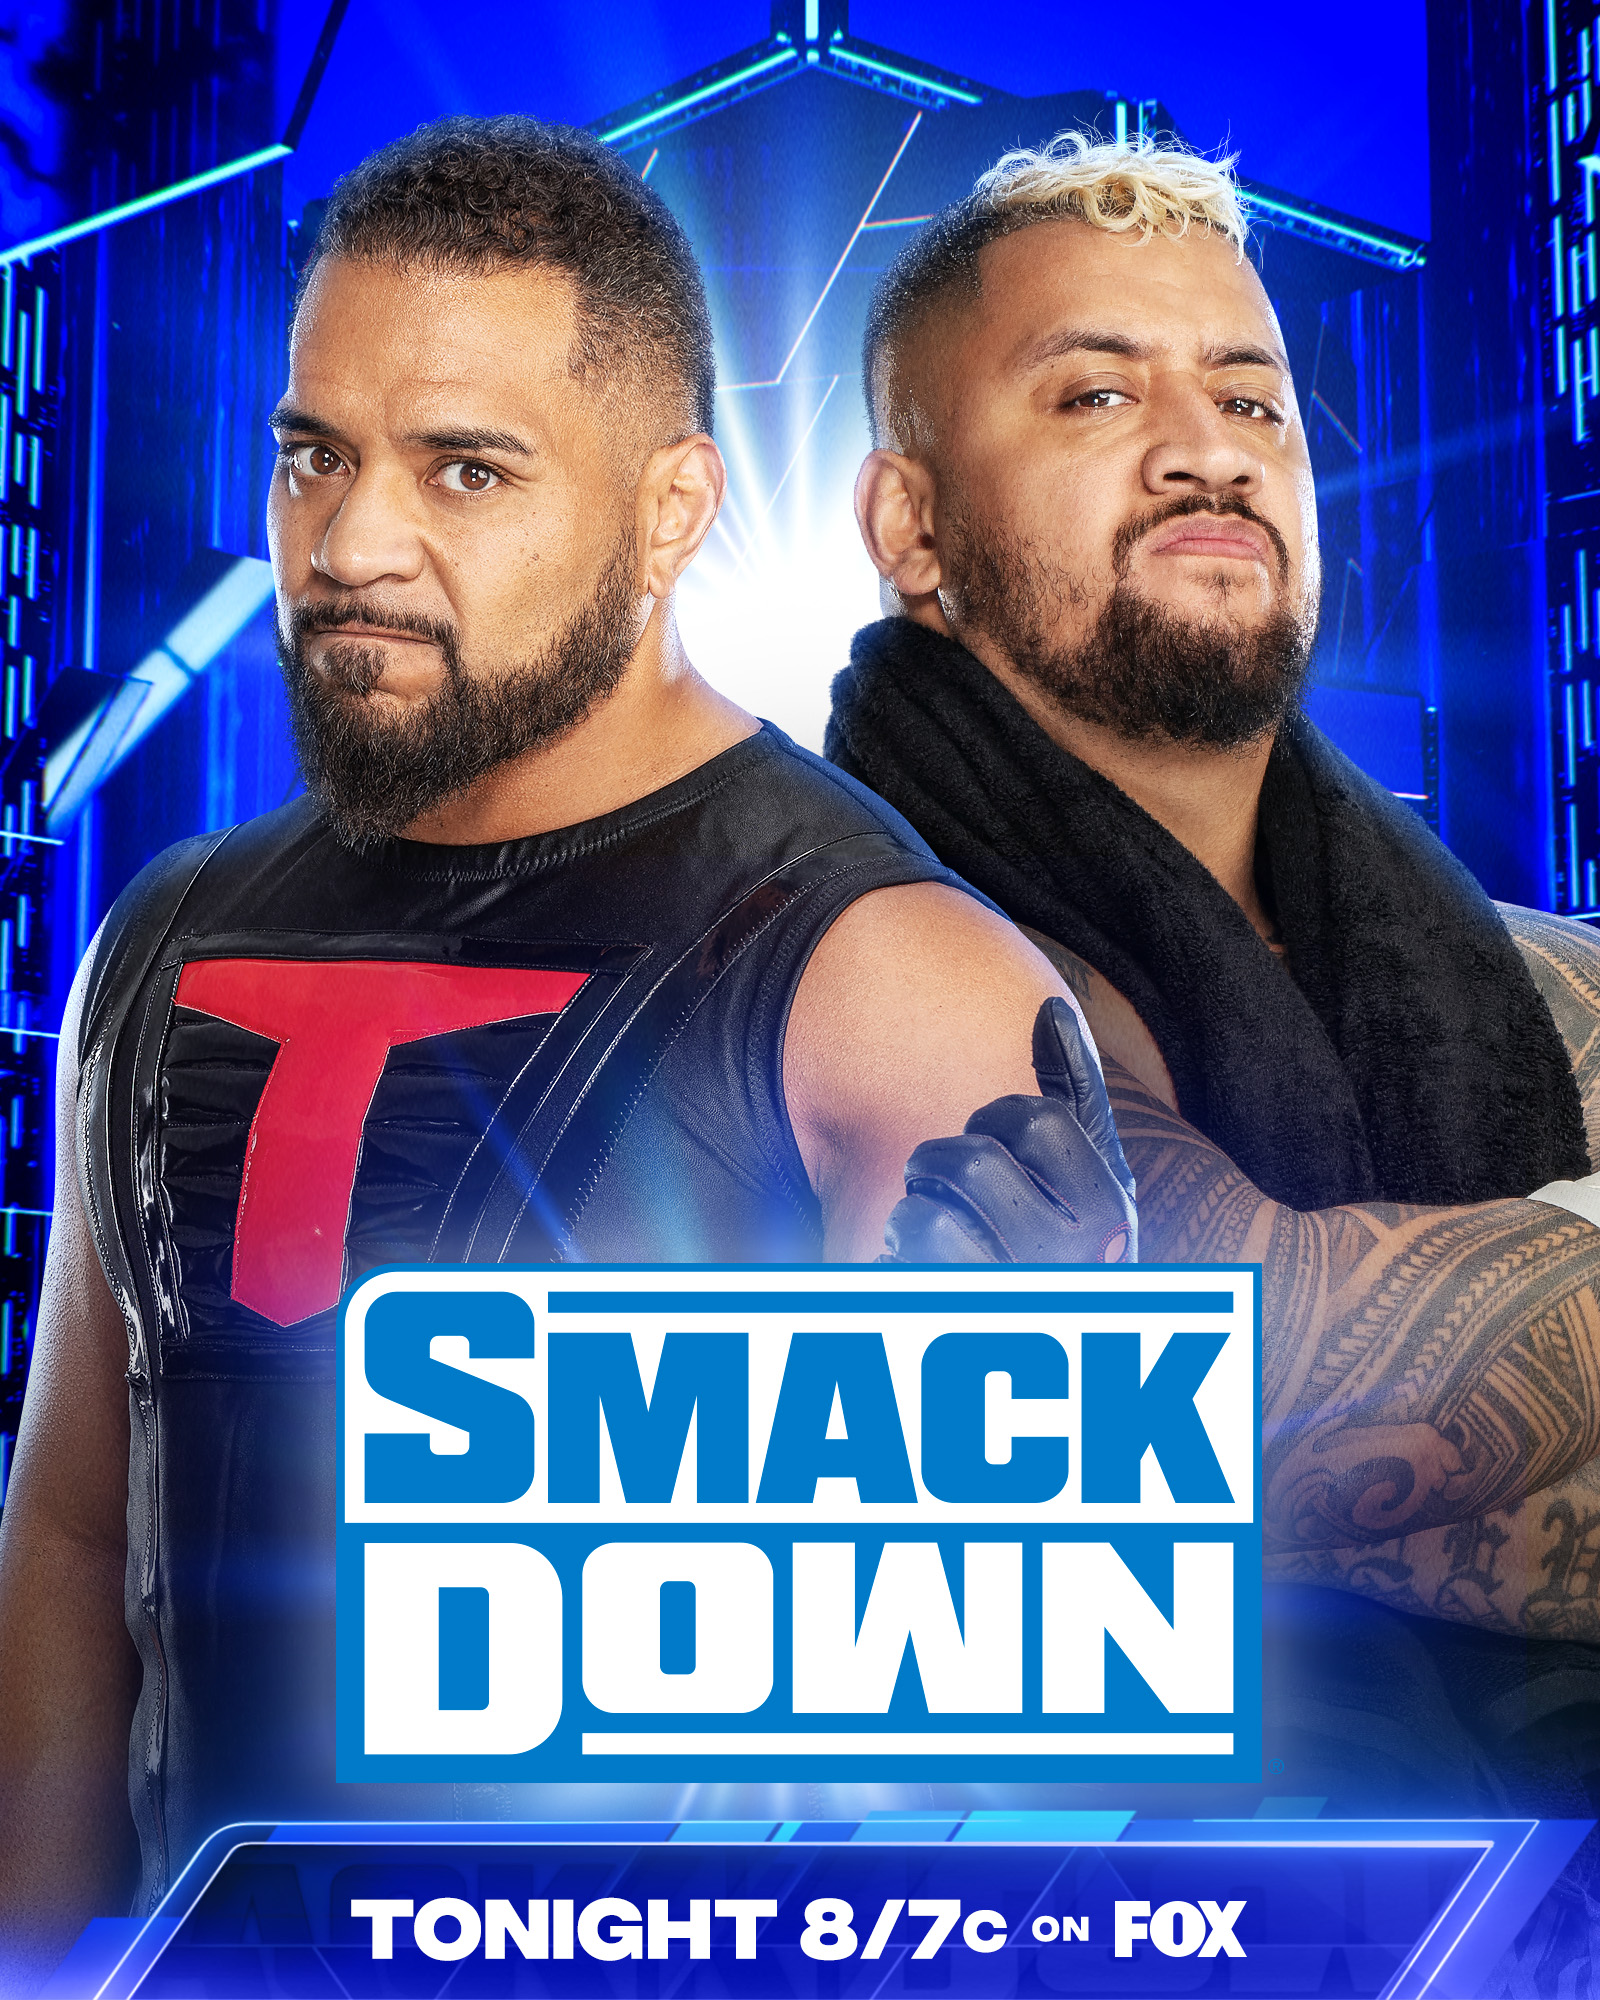 News About Smackdown